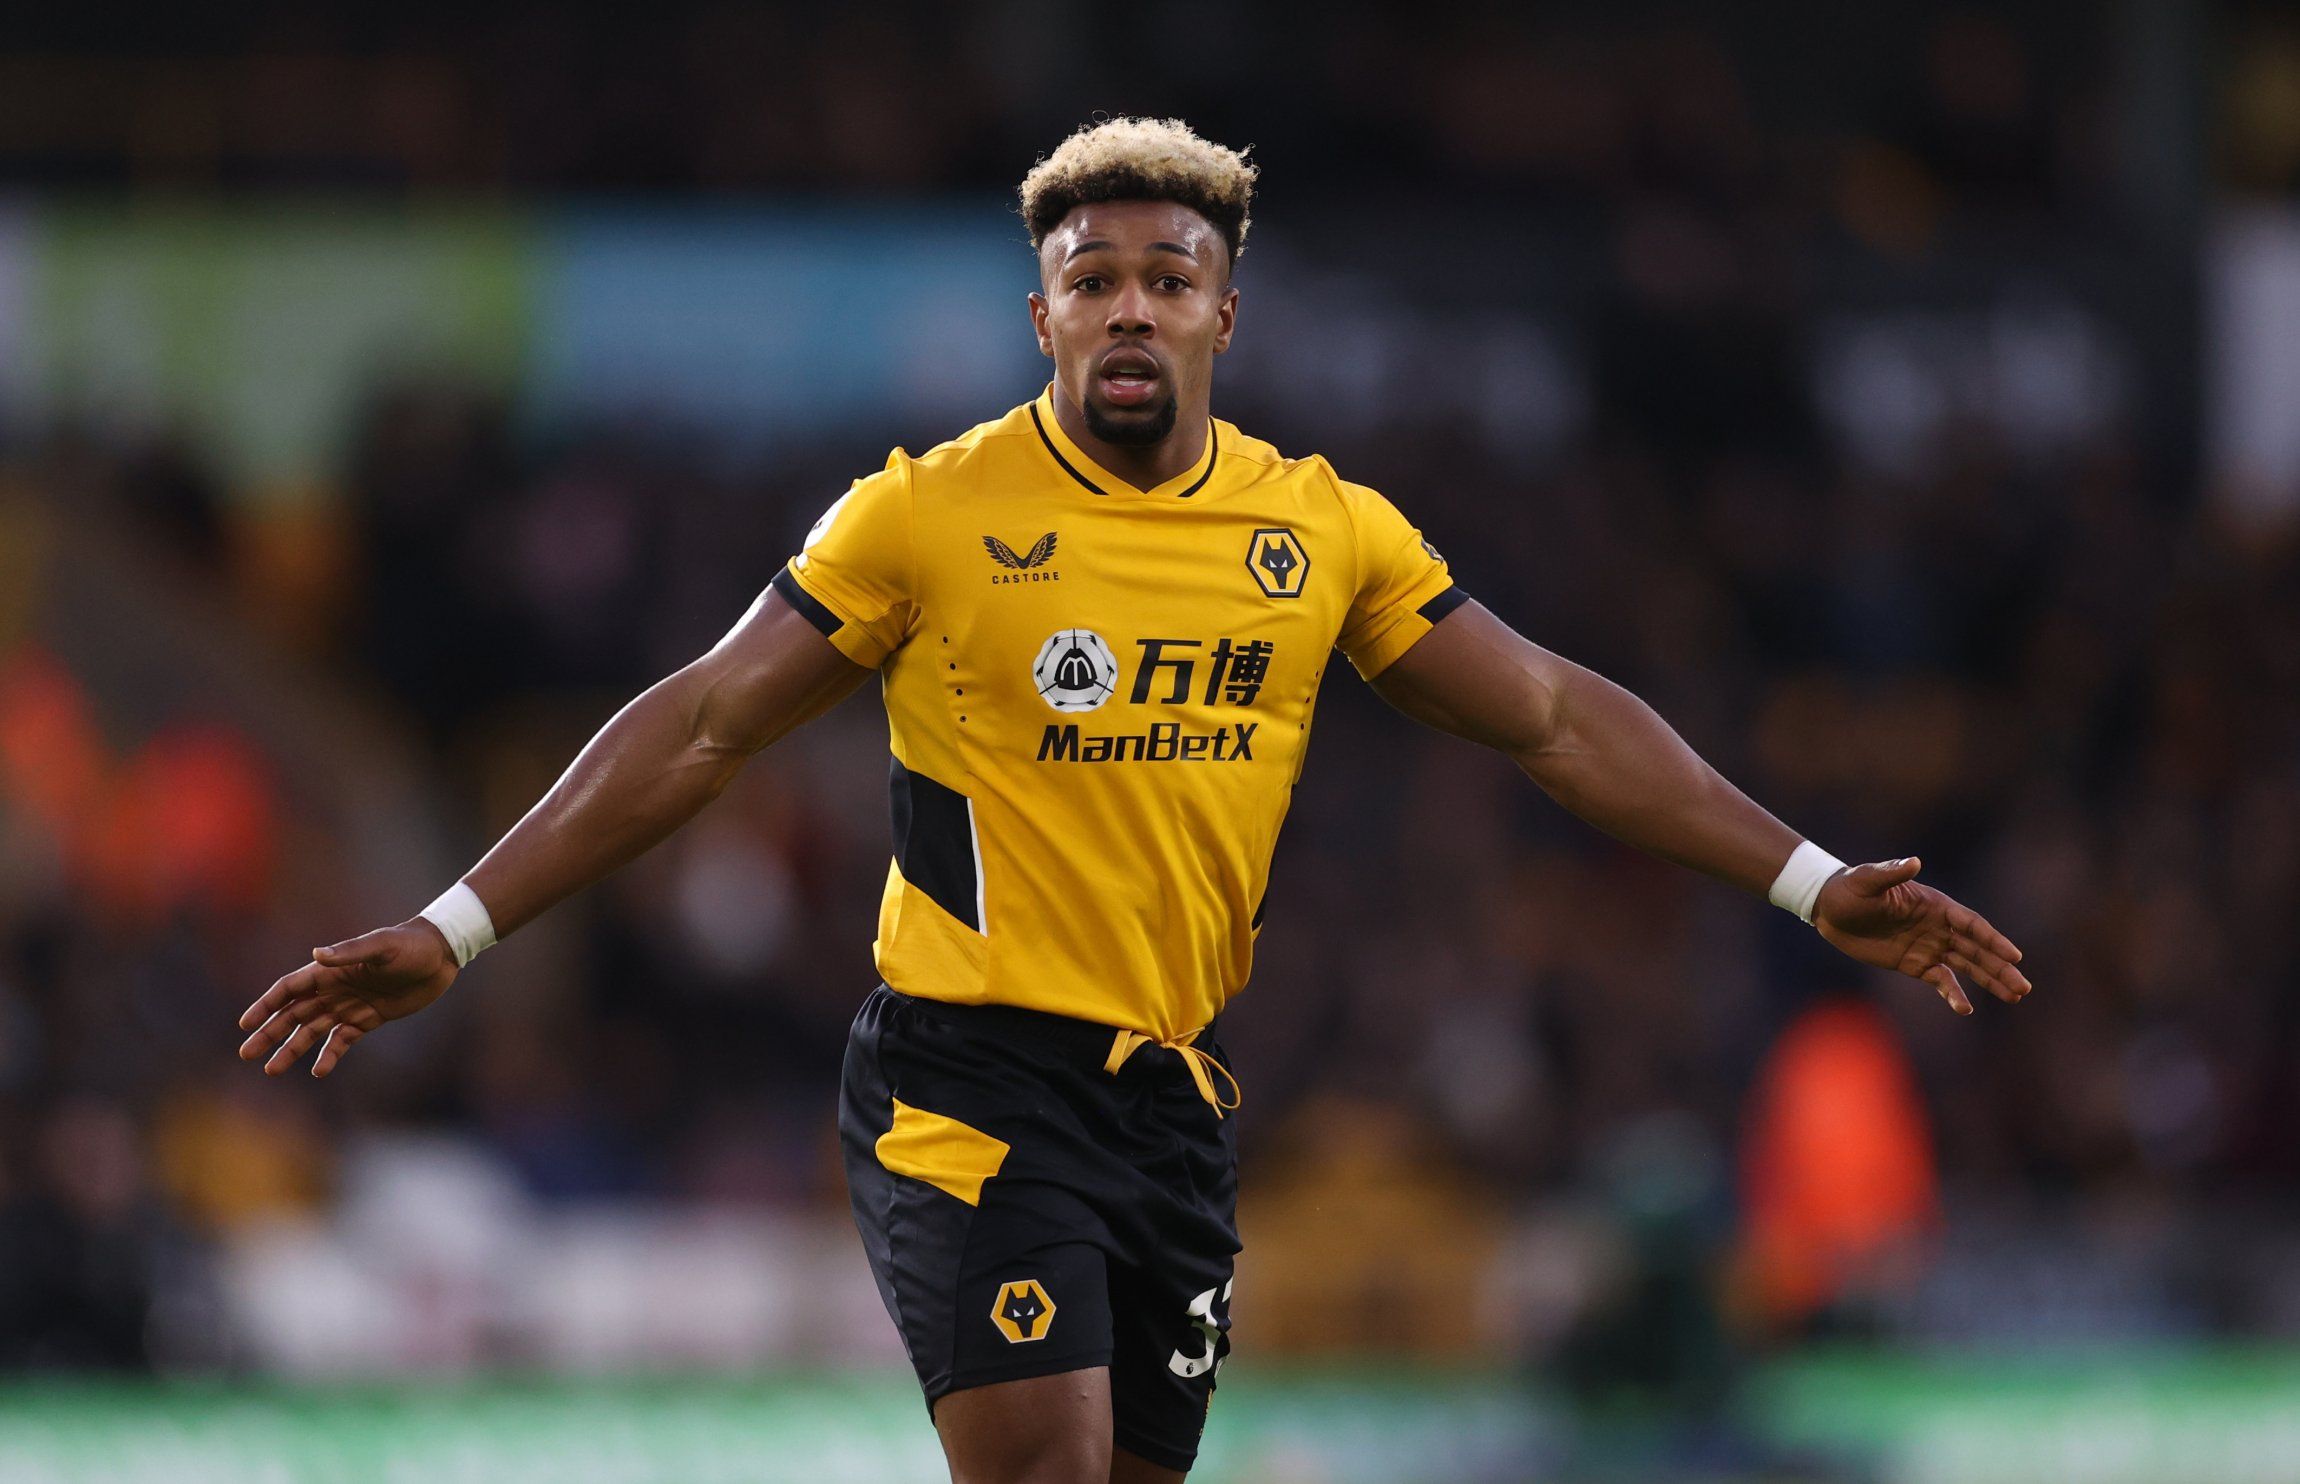 Bruno Lage, Fosun, Jeff Shi, Molineux, The Old Gold, Wolves, Wolves fans, Wolves info, Wolves latest, Wolves news, Wolves updates, WWFC, WWFC news, WWFC update, Premier League, Premier League news, Wolverhampton Wanderers, Wolves transfer news, January transfer window, Adama Traore, 
